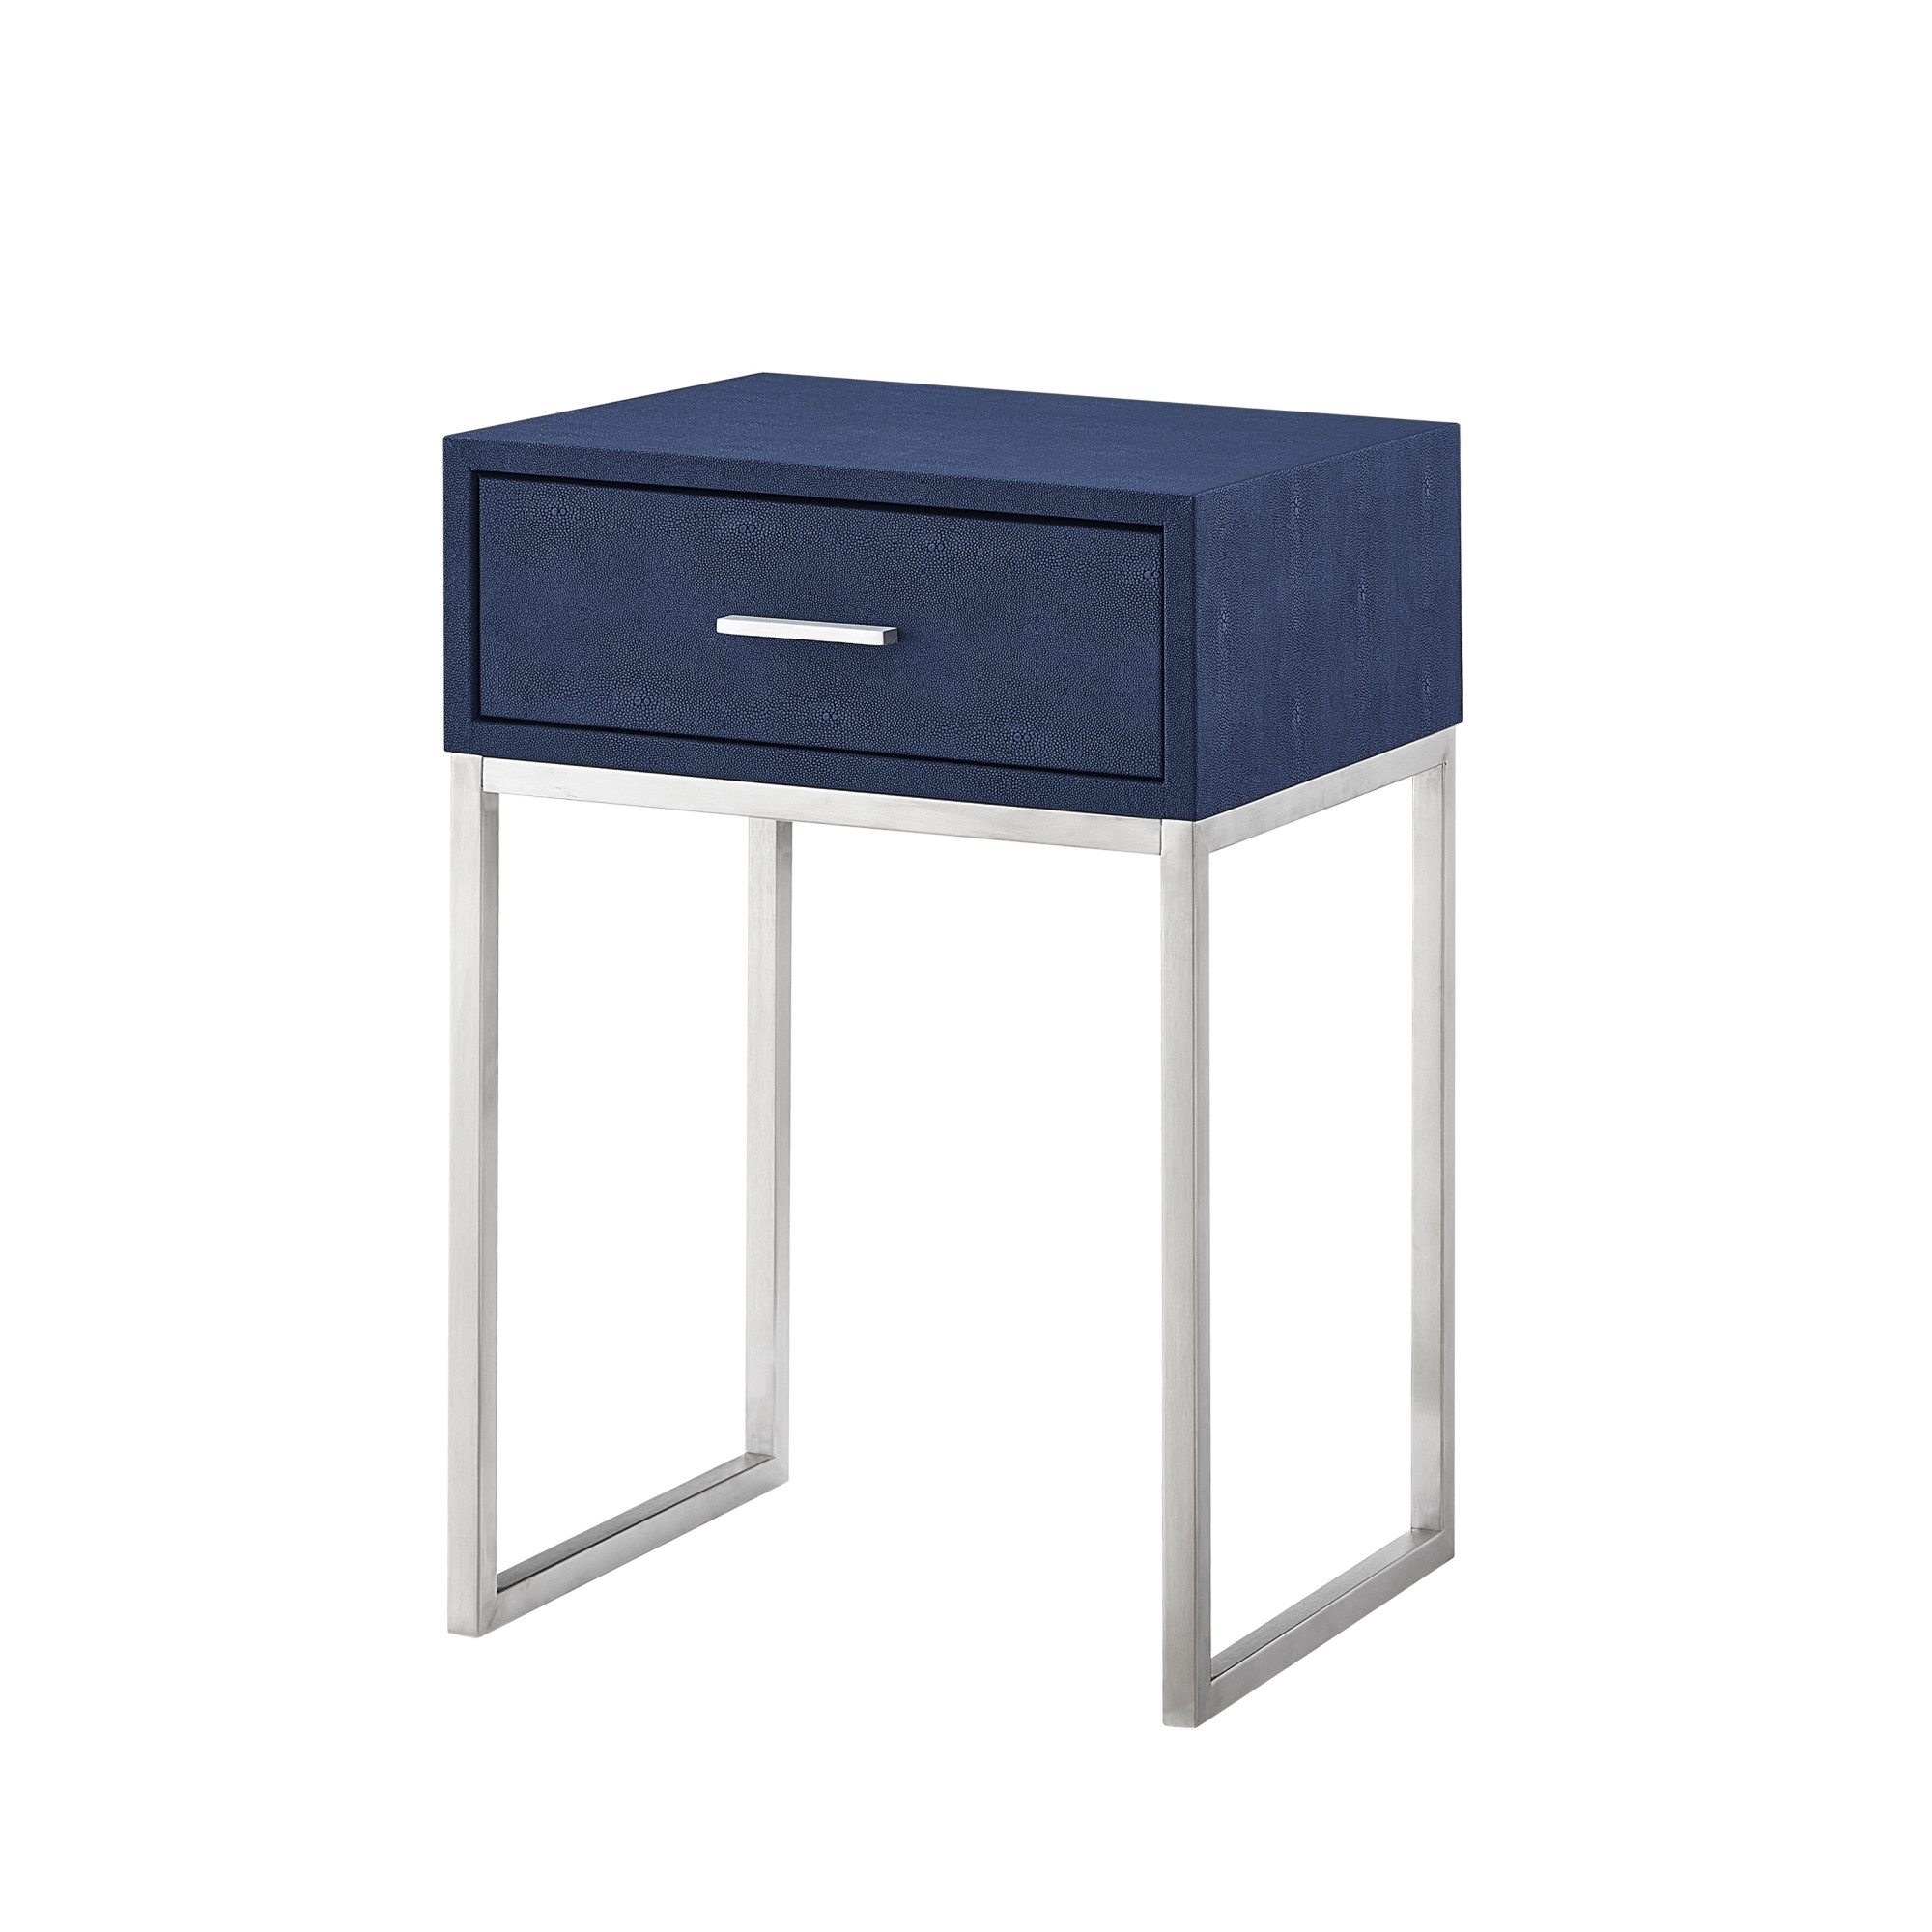 24" Silver Metallic and Navy Blue End Table with Drawer-543907-1